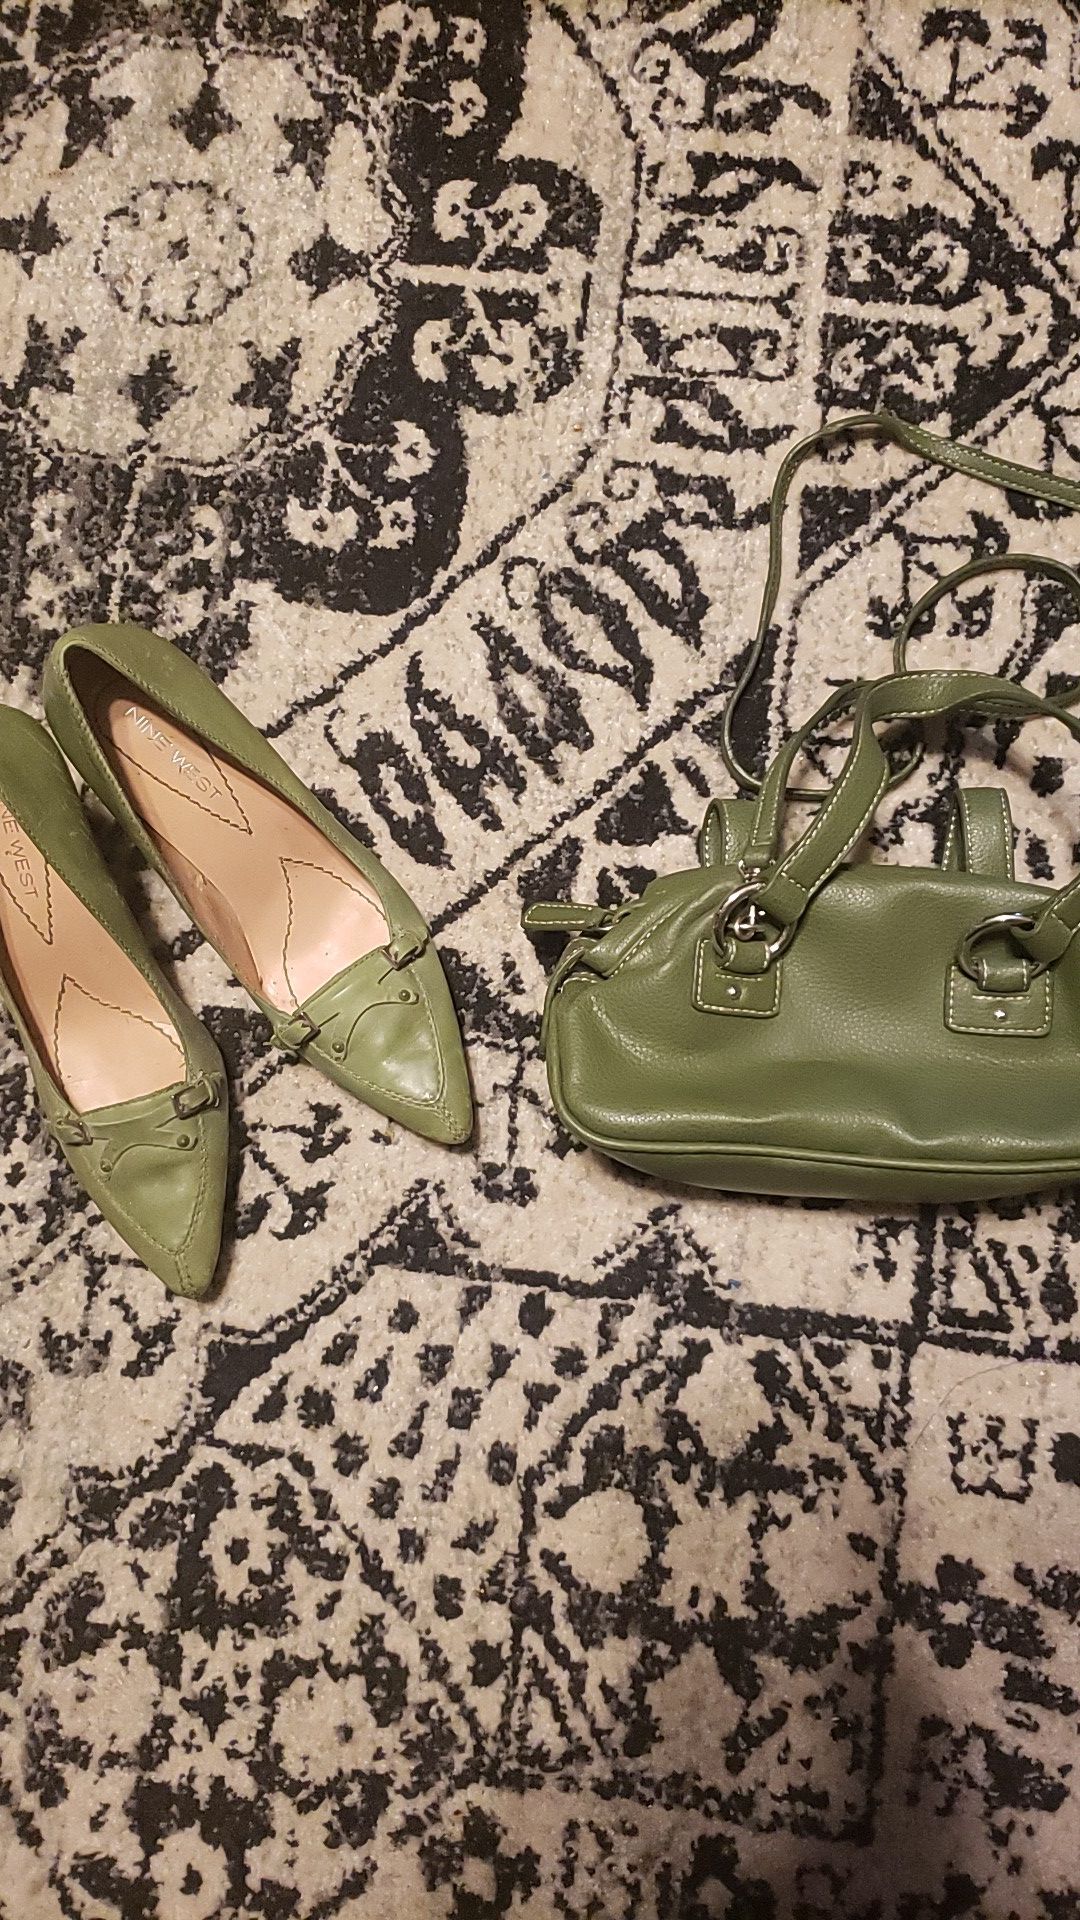 Size 5.5 Nine West heels and matching purse